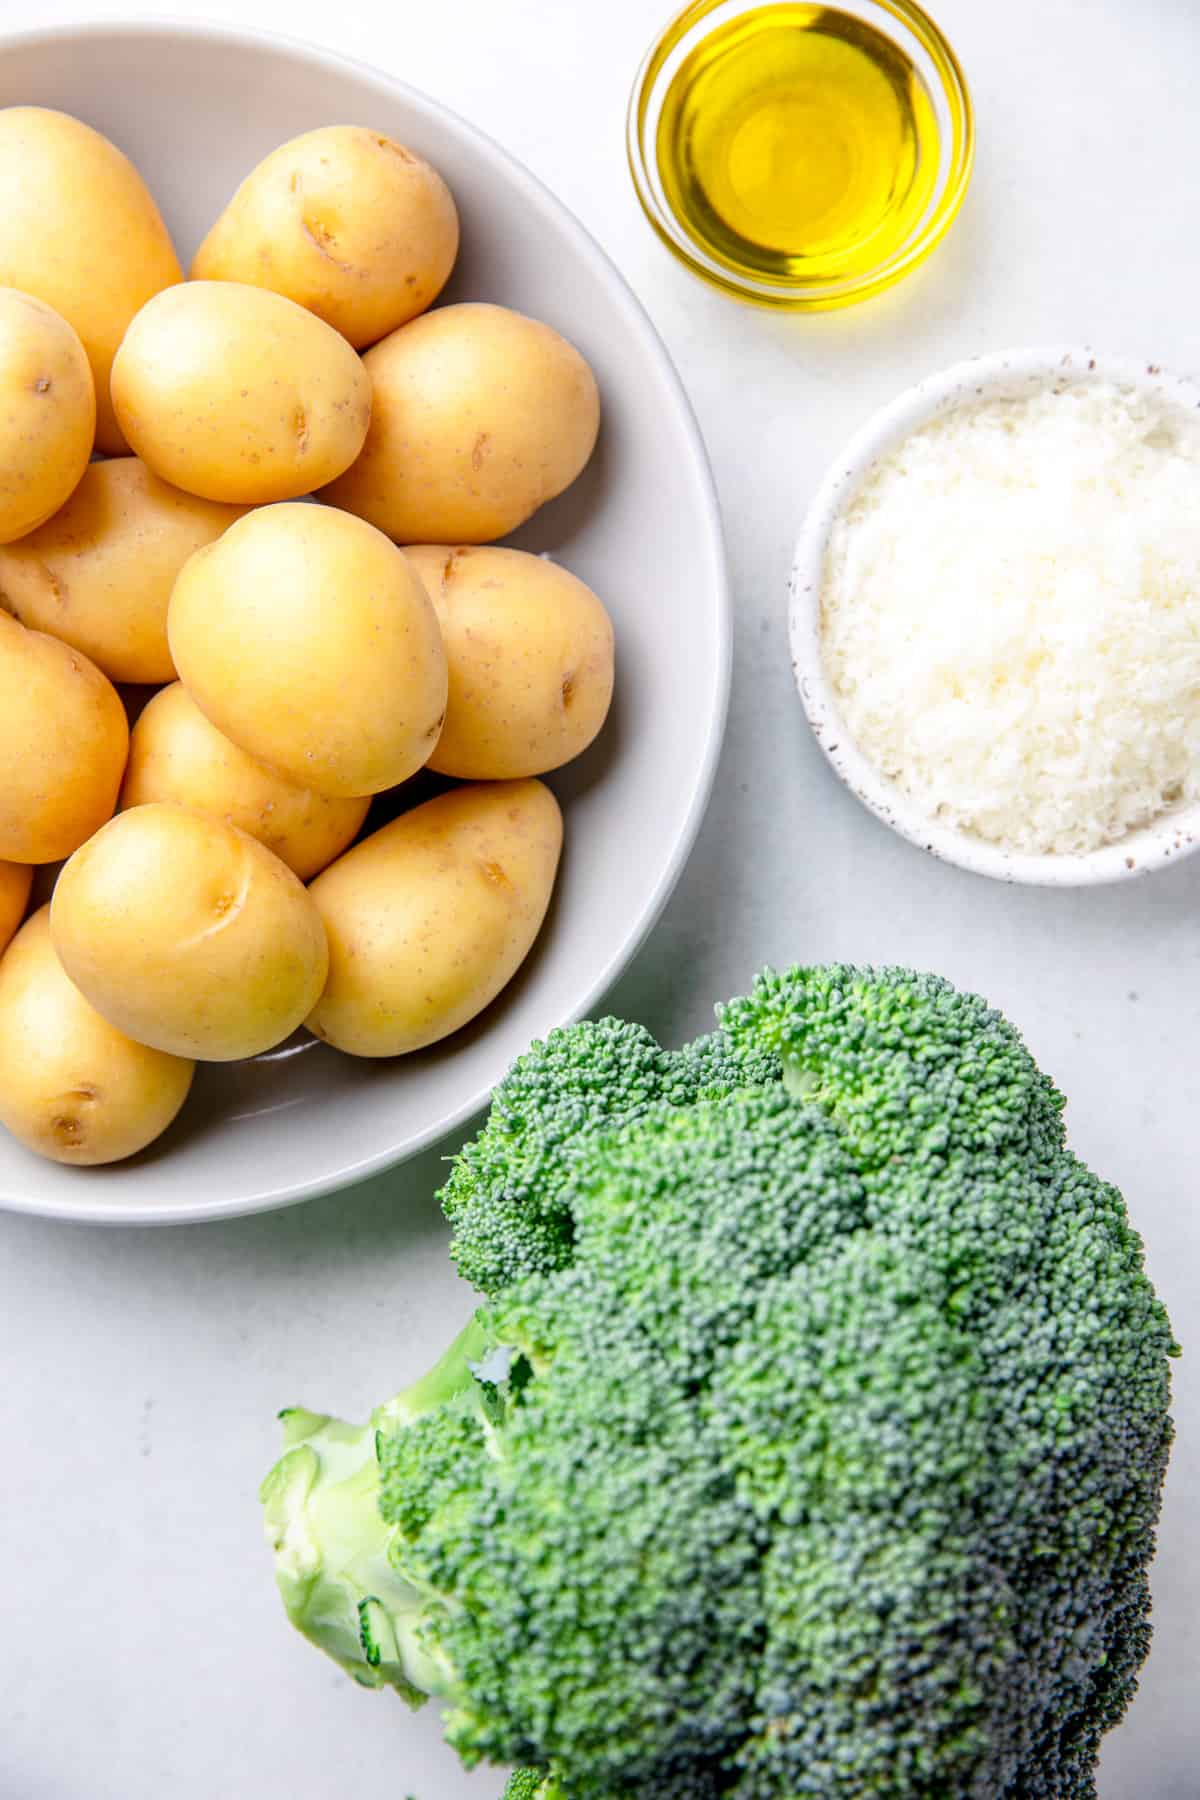 Ingredients to make Roasted Potatoes and Broccoli.